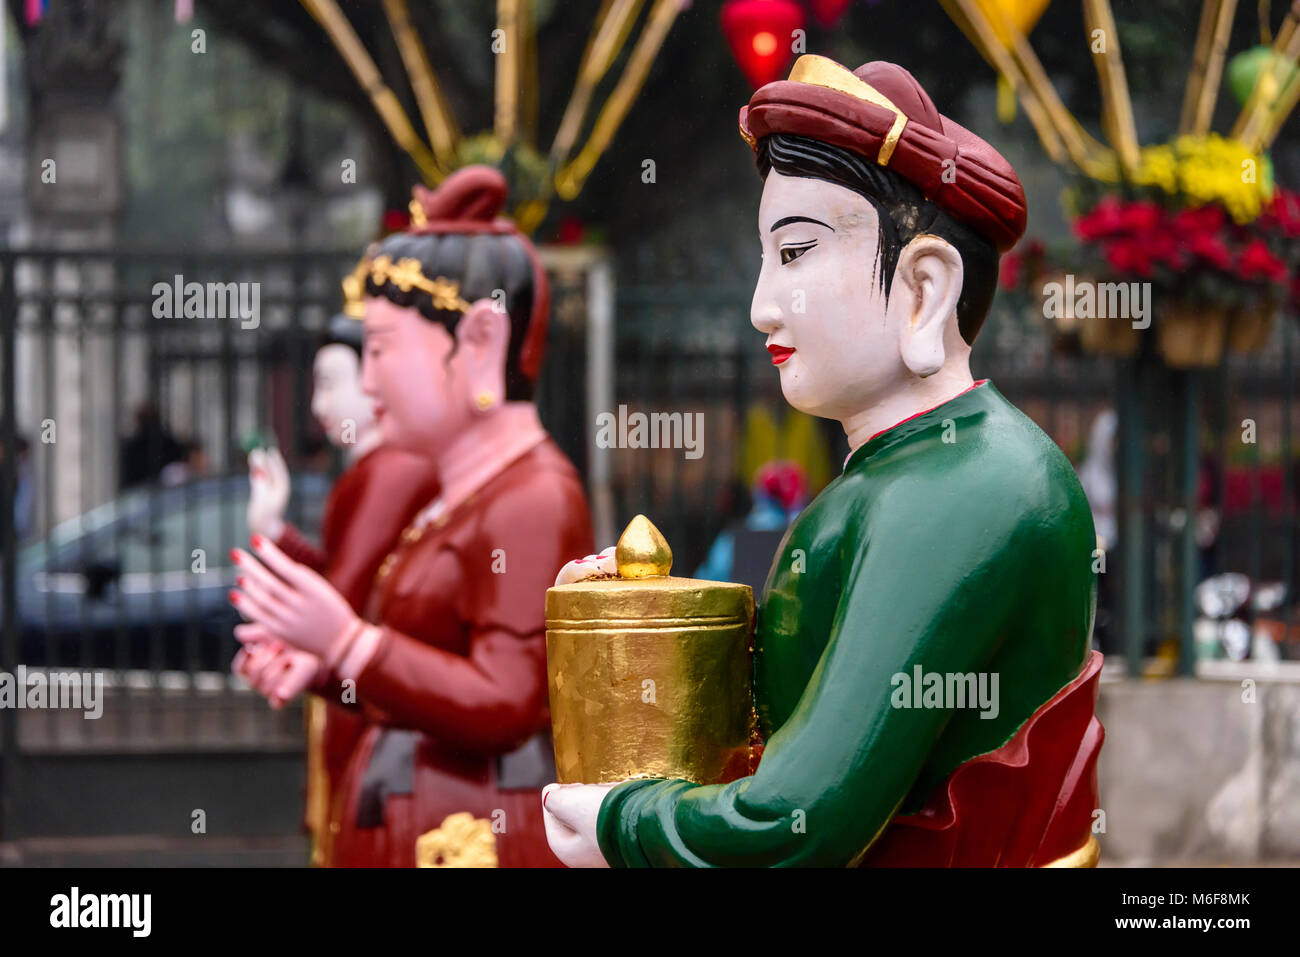 Statues in a garden in Hanoi, Vietnam to celebrate the Chinese New Year. Stock Photo